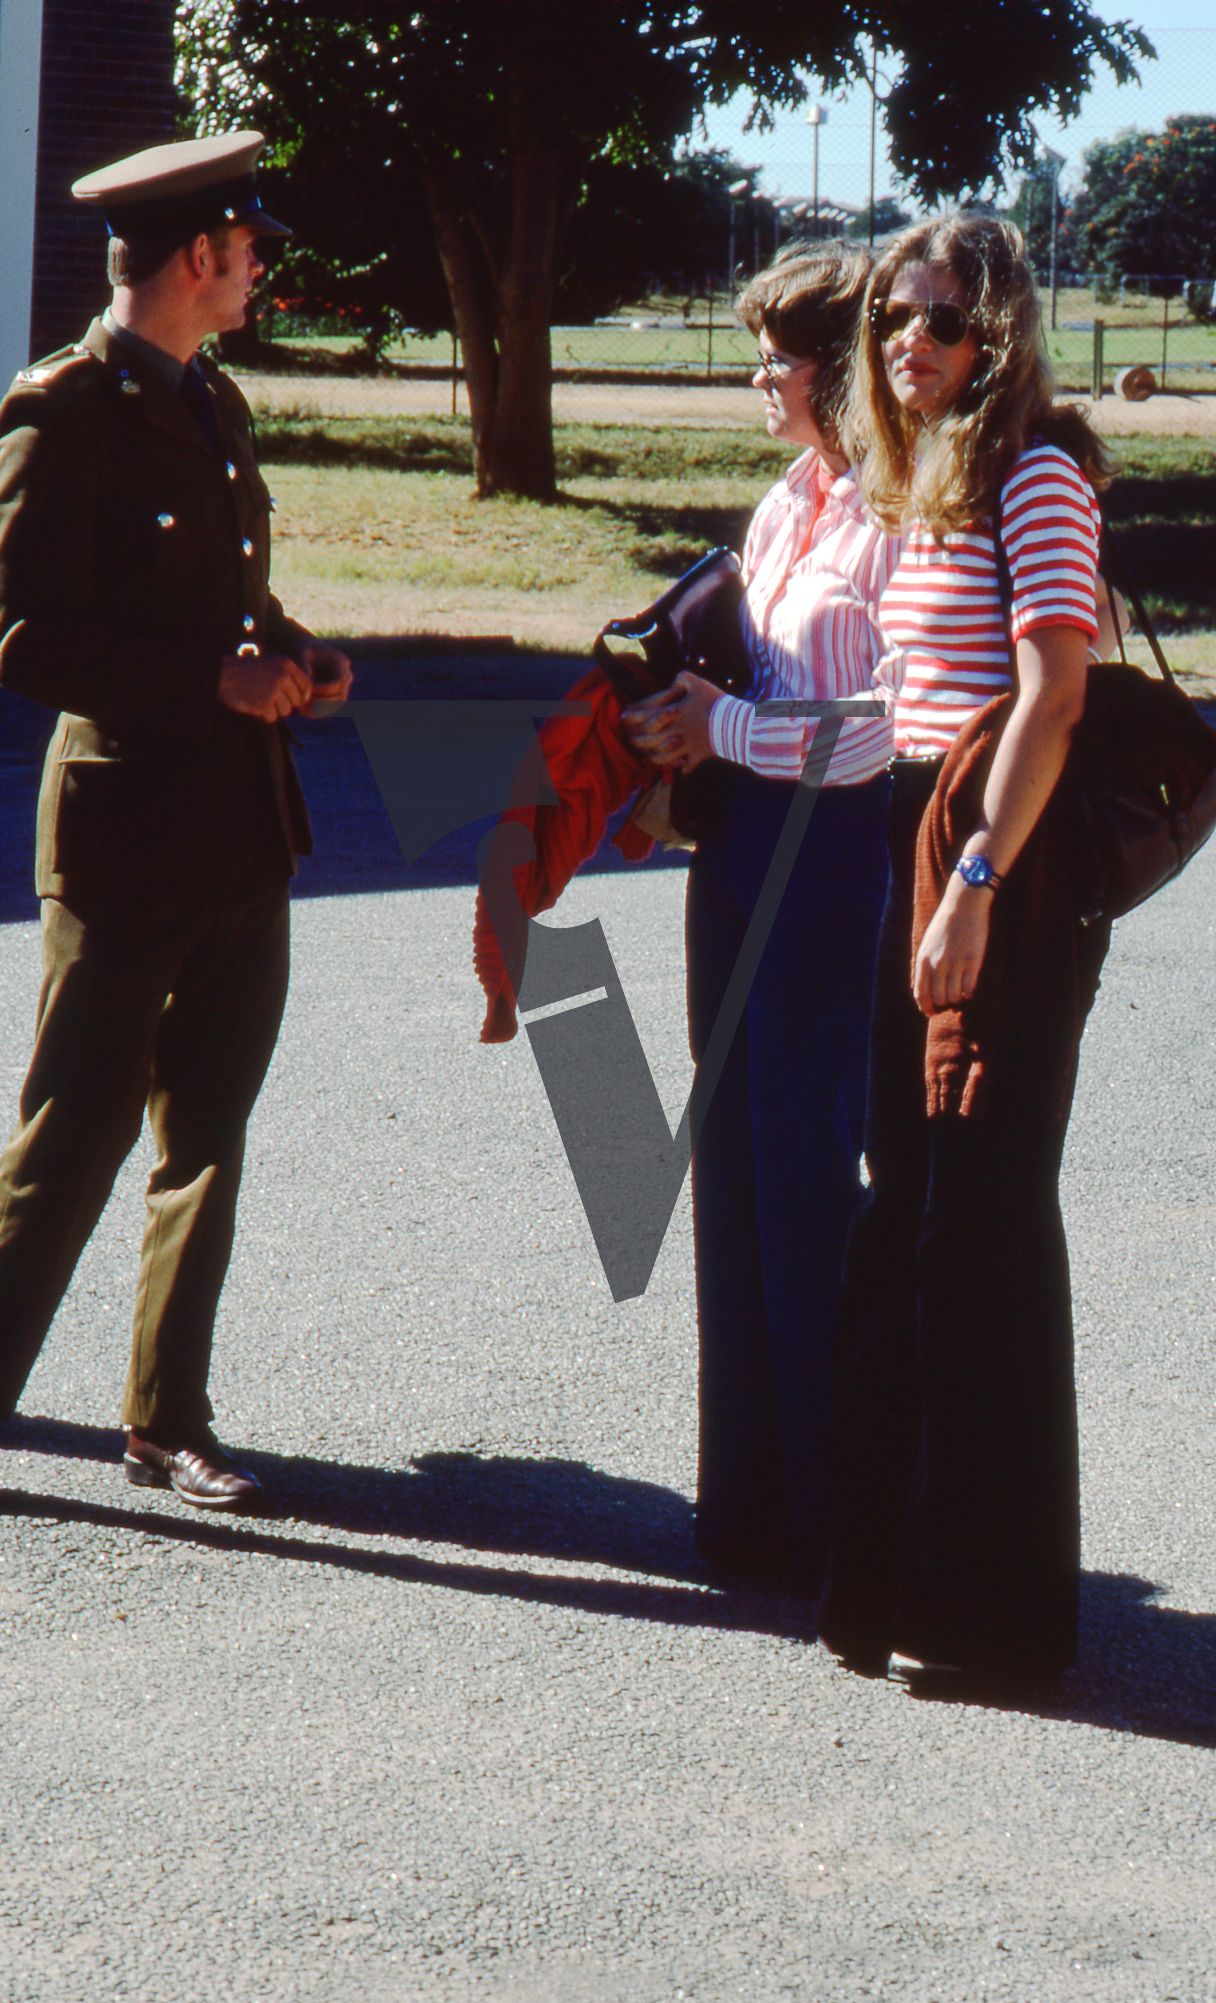 Rhodesia, Rhodesian Light Infantry passing out ceremony, British South Africa Policeman (BSAP) with two women, full shot.